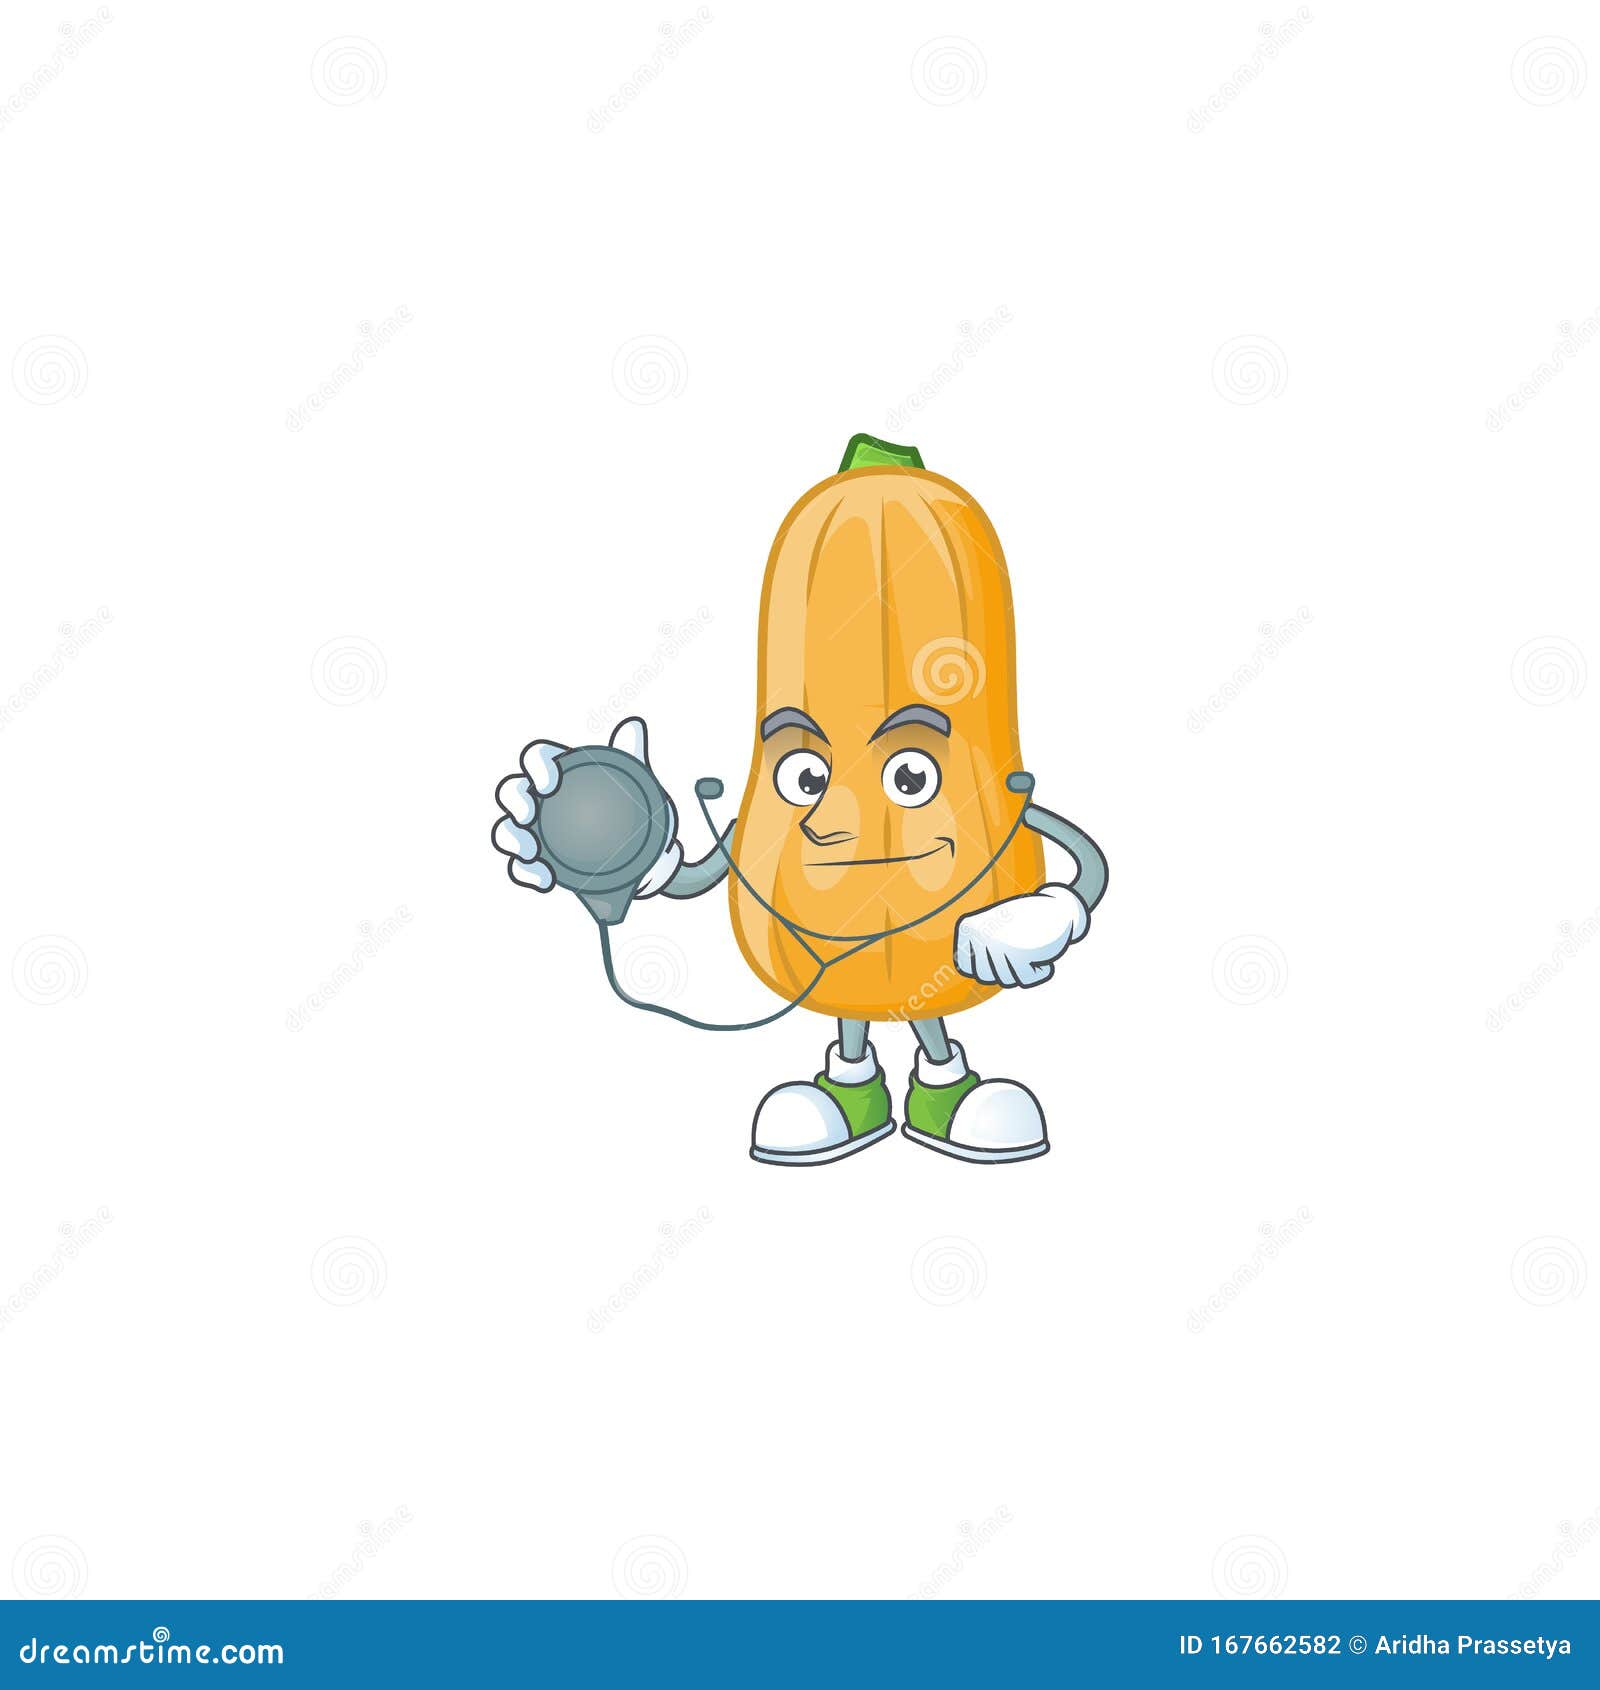 https://thumbs.dreamstime.com/z/butternut-squash-cartoon-character-style-as-doctor-tools-butternut-squash-cartoon-character-style-as-doctor-tools-167662582.jpg